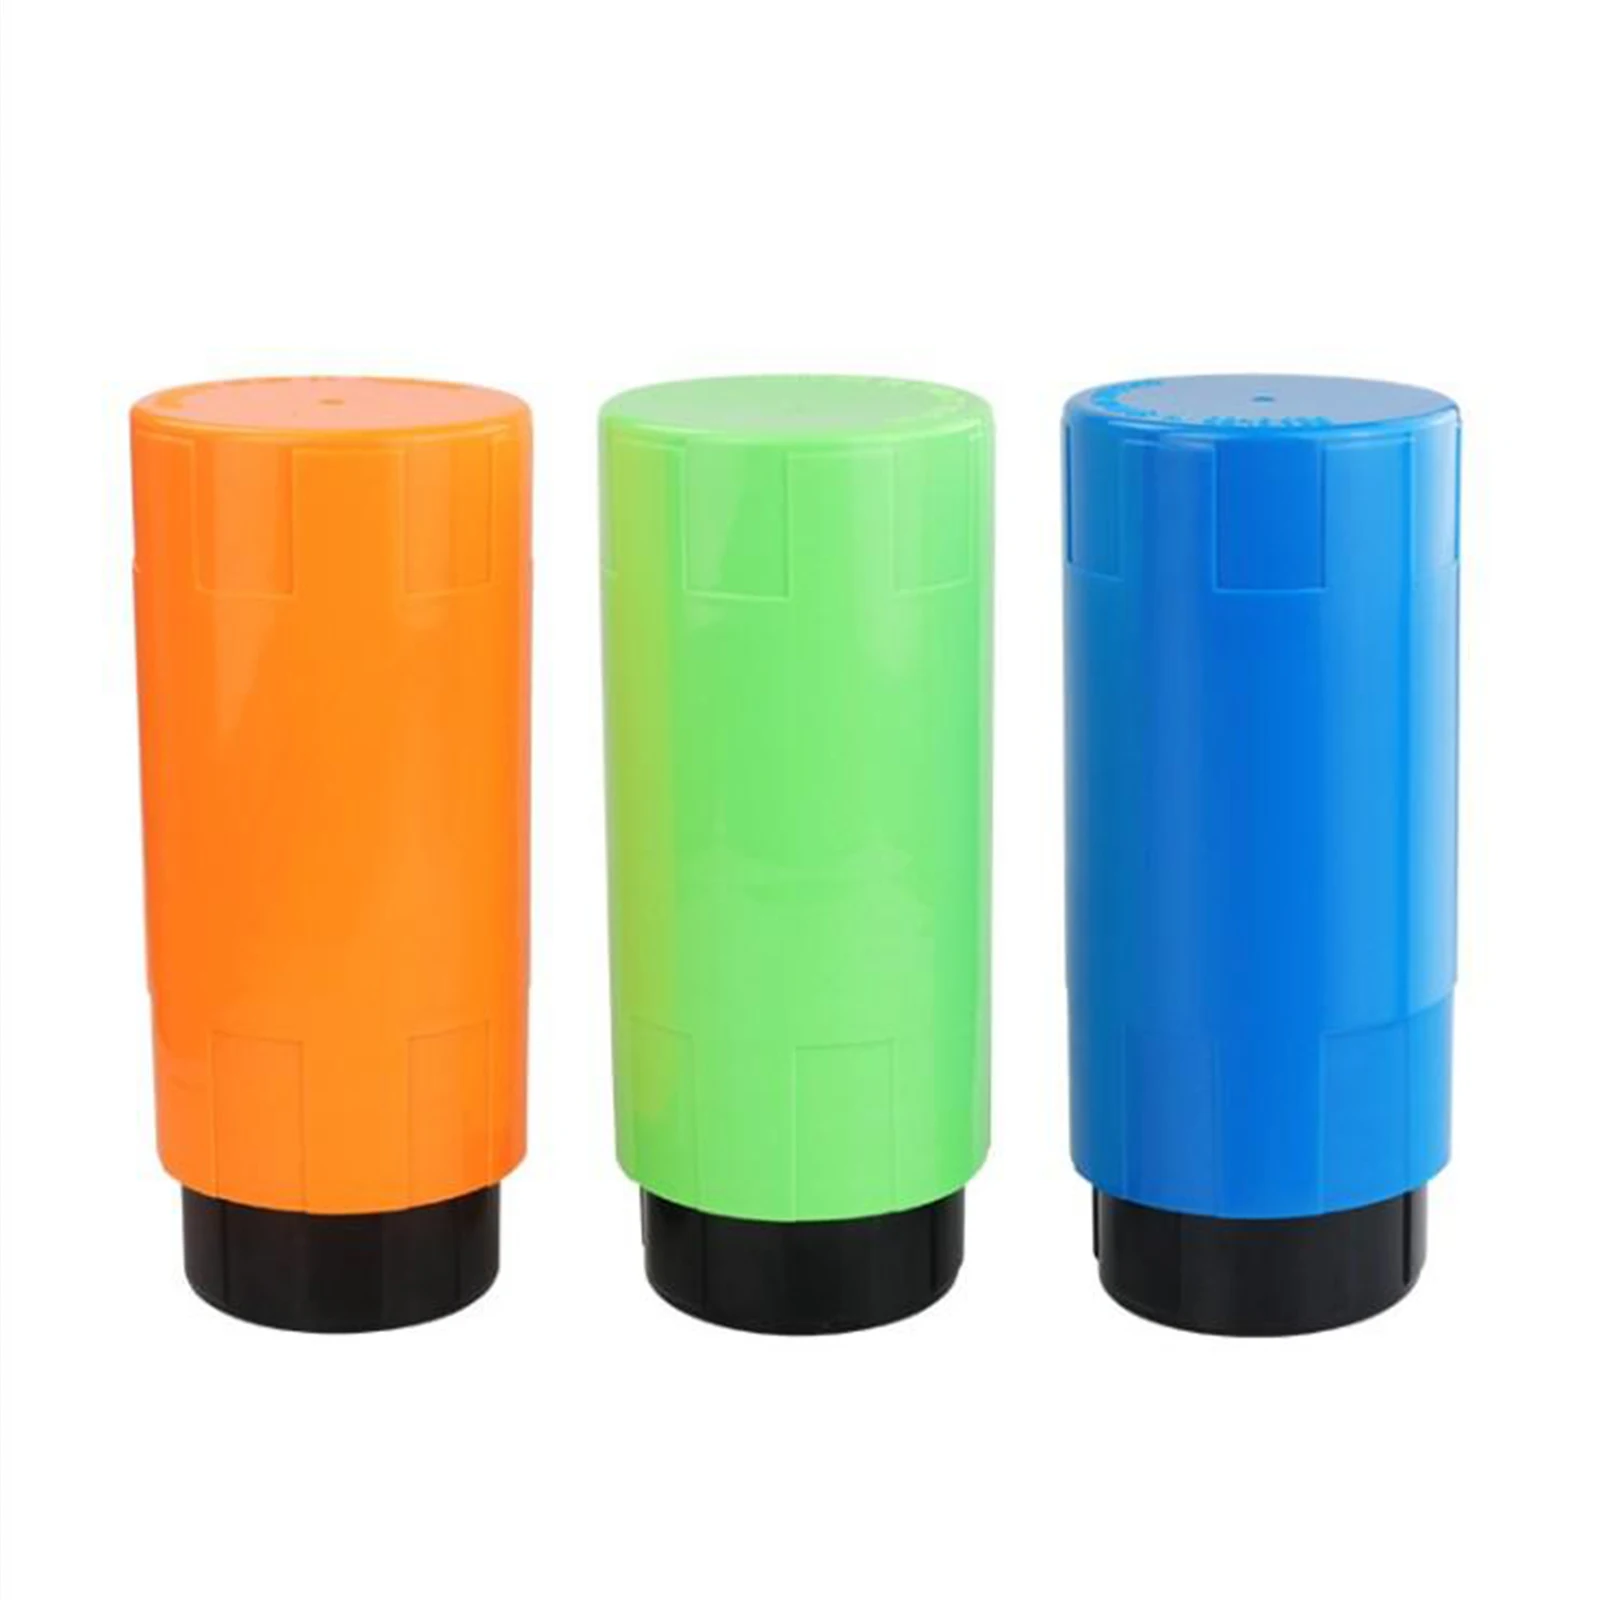 Details about   Durable Tennis Ball Saver Container Containers Pressurizer Gear Accessories 